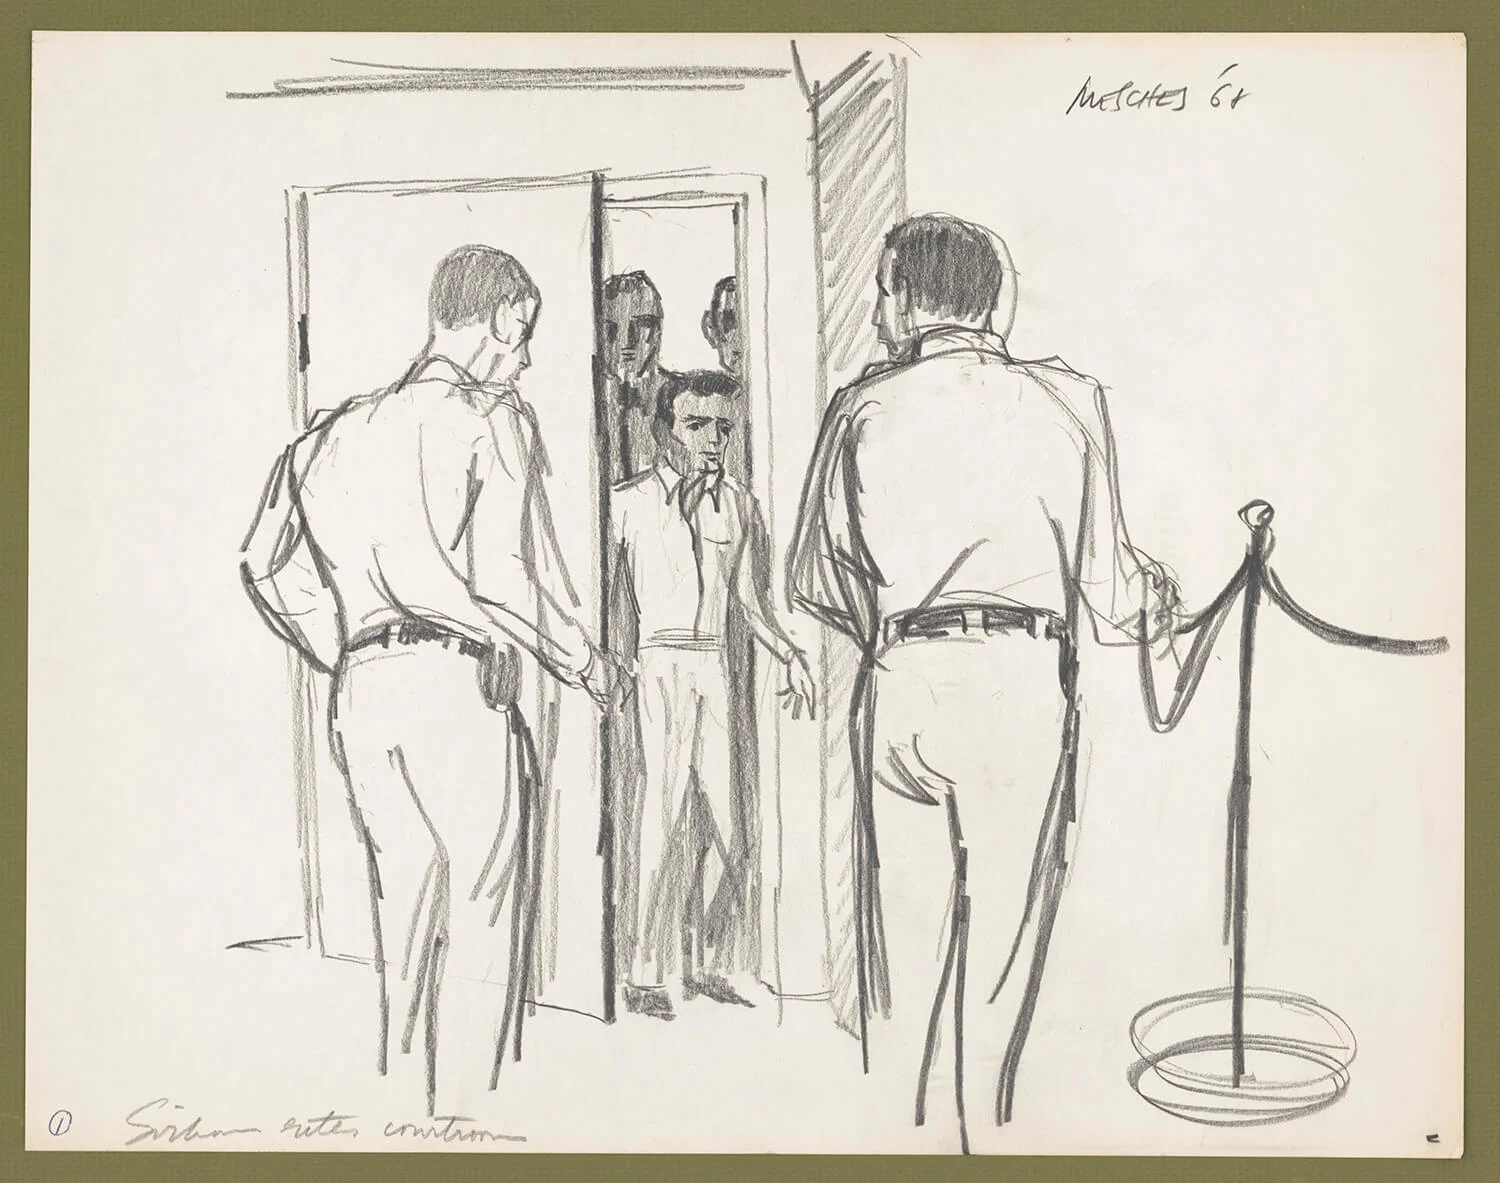 Sirhan enters courtroom, 1968. Image courtesy Arnold Meches / Library of Congress, Prints & Photographs Division